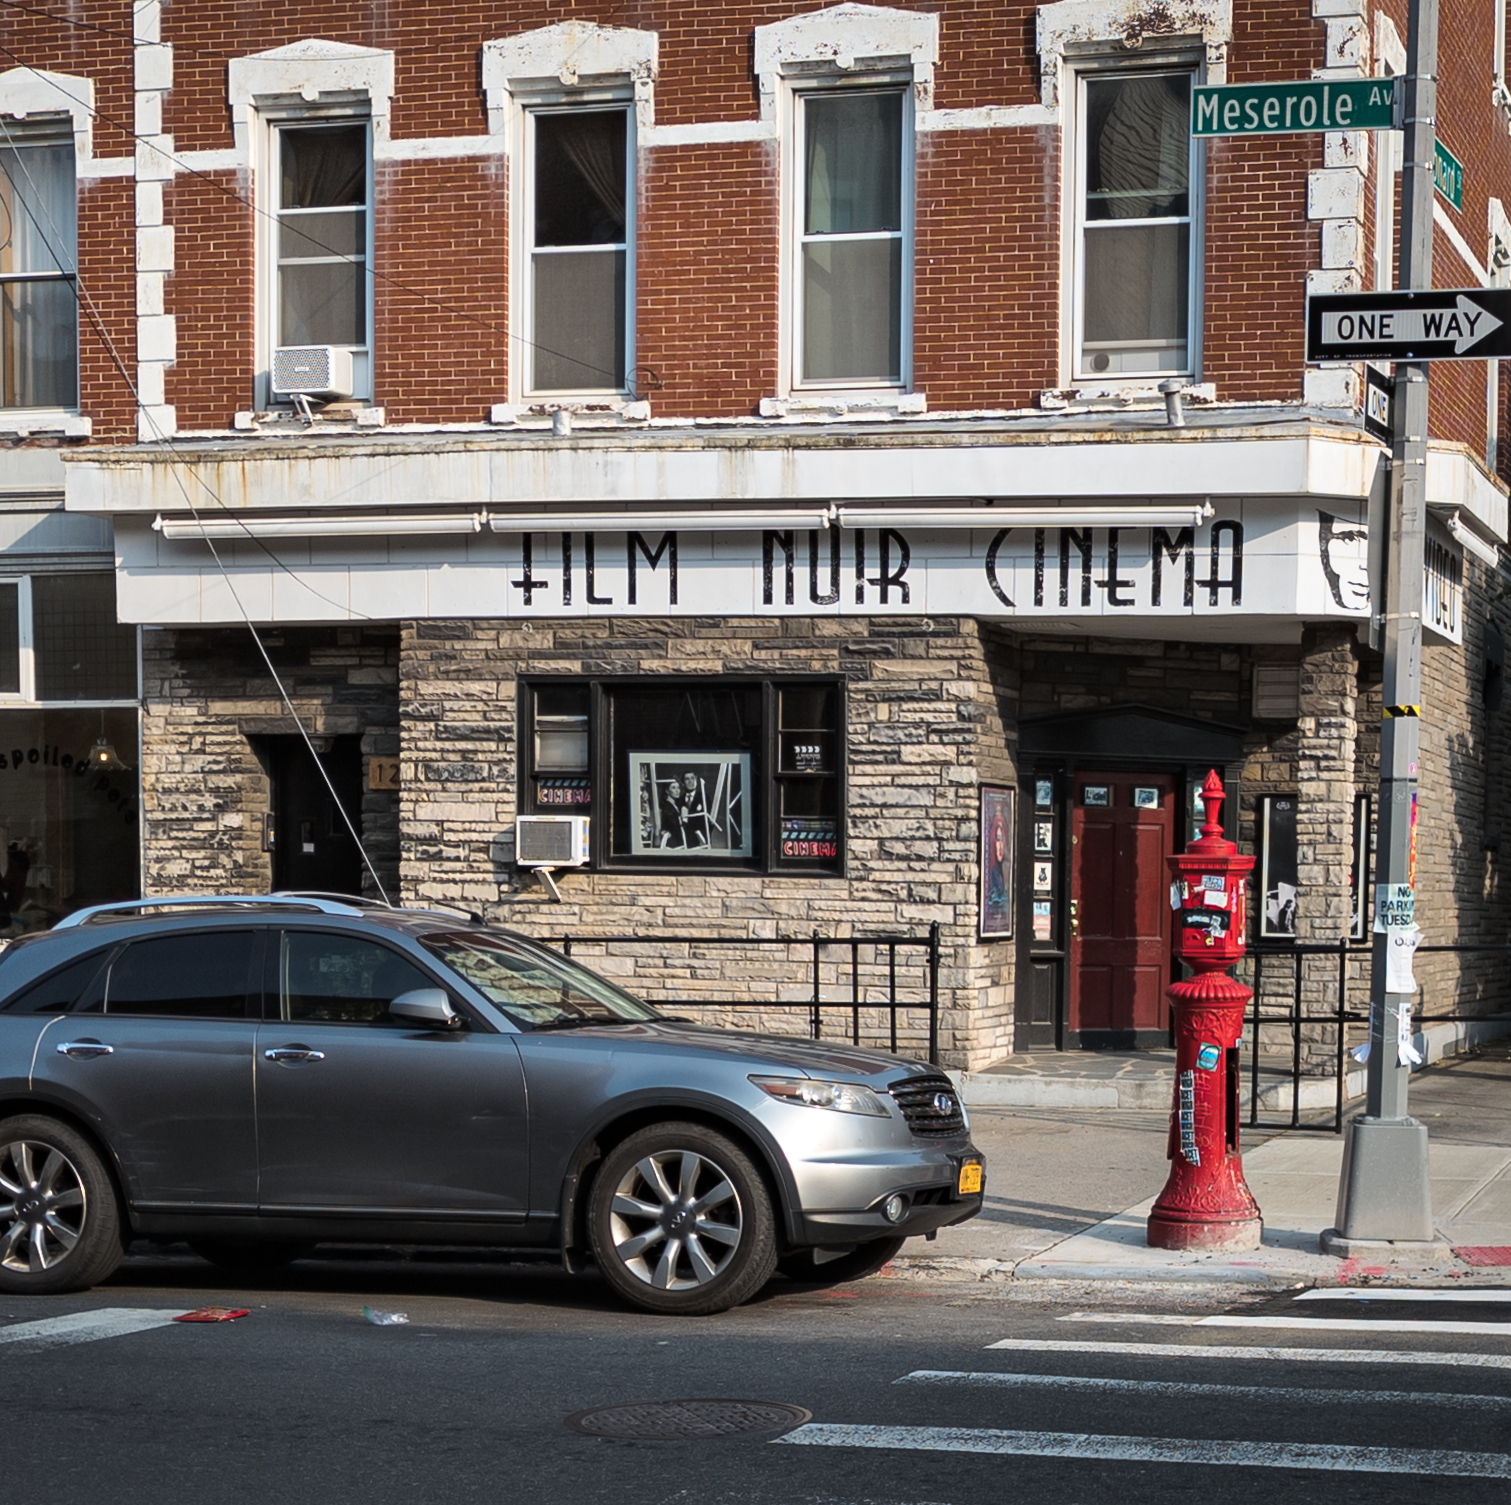 The store, Film Noise Cinema, on the street, with the name in large black letter hanging down. A red door leads inside, it's closed. There's a car parked in front and a red NYC emergency phone for firefighters in front of it